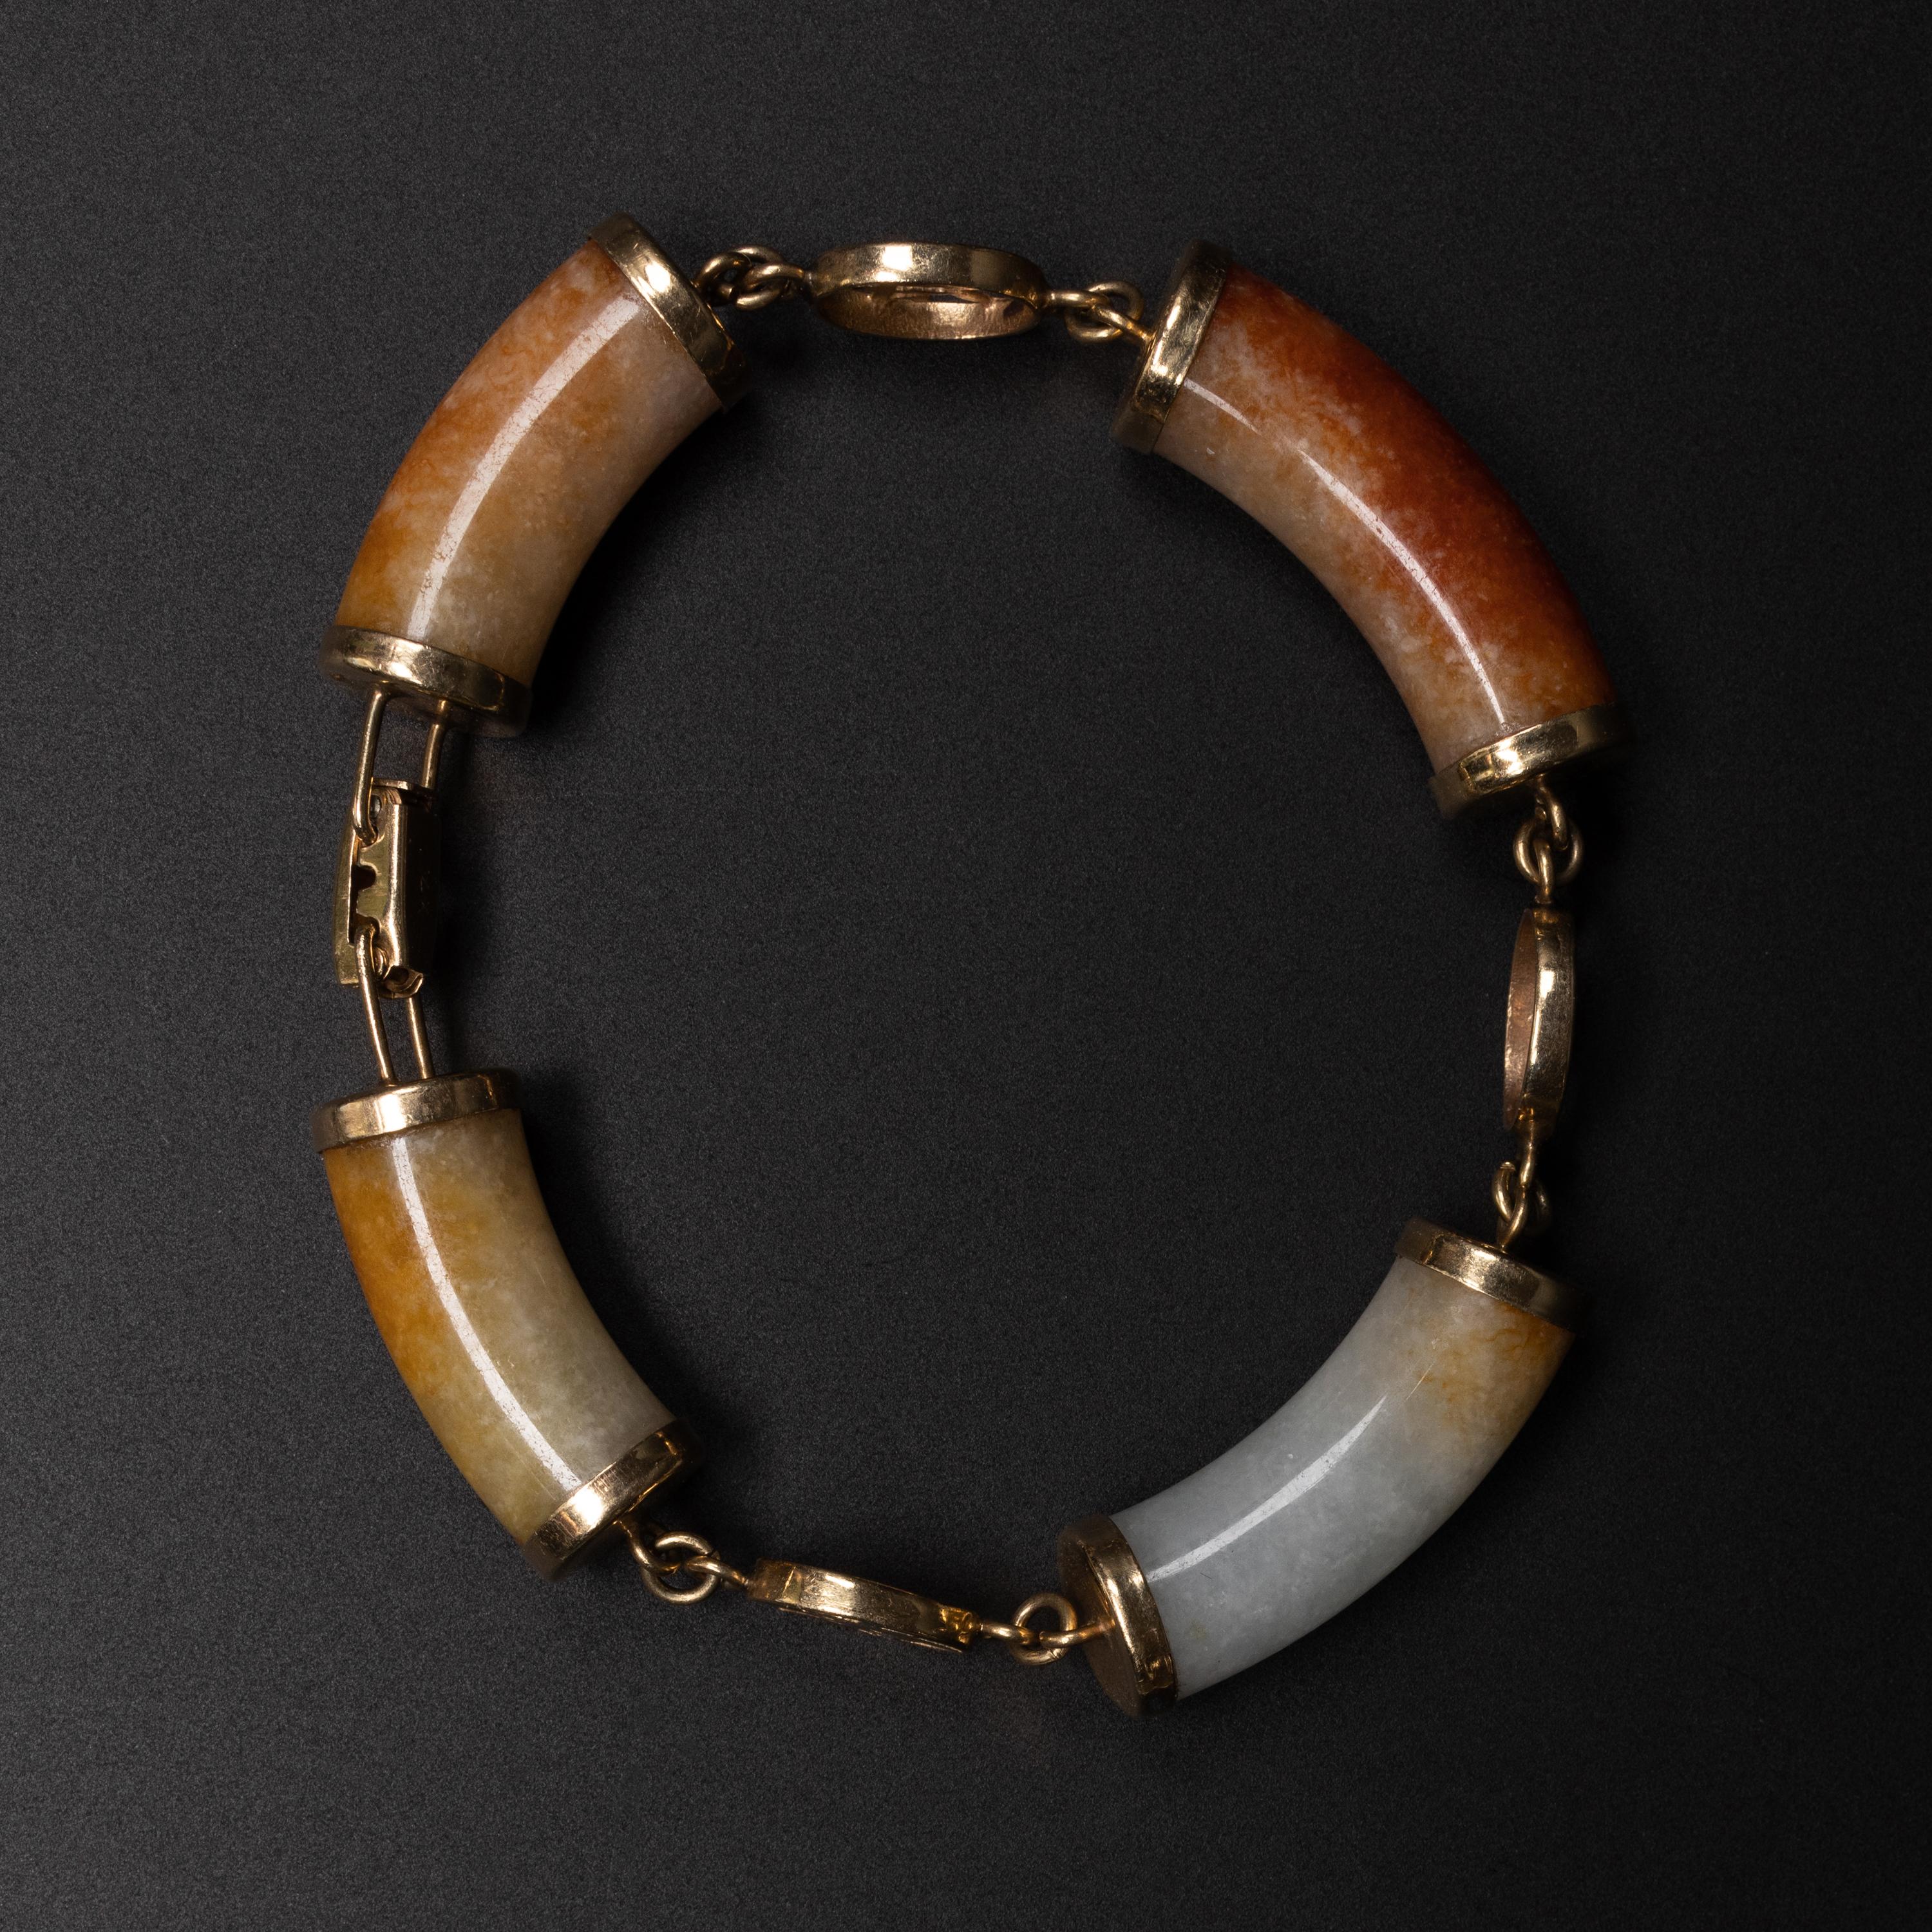 This mid-century (circa 1960) bracelet from iconic Ming's of Hawaii is composed of four hand-carved tubular segments of slightly curved natural and untreated nephrite jade in white, yellowish-brown and russet-red. Each jade segment is capped at both